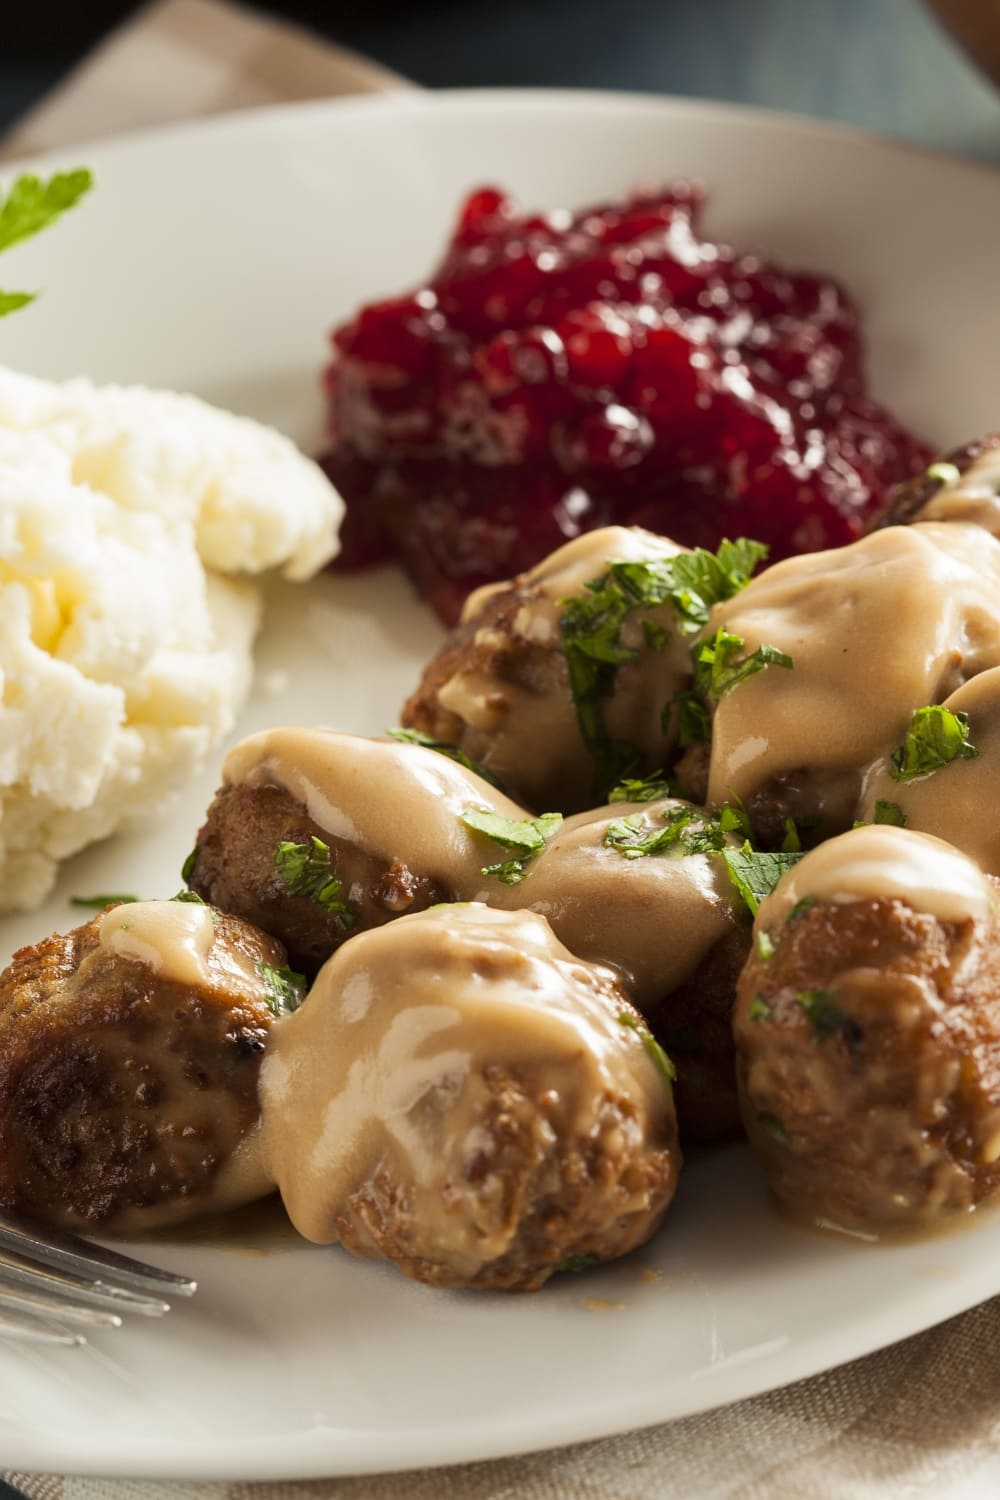 Homemade Swedish Meatballs with Gravy, Mashed Potato and Cranberry Sauce